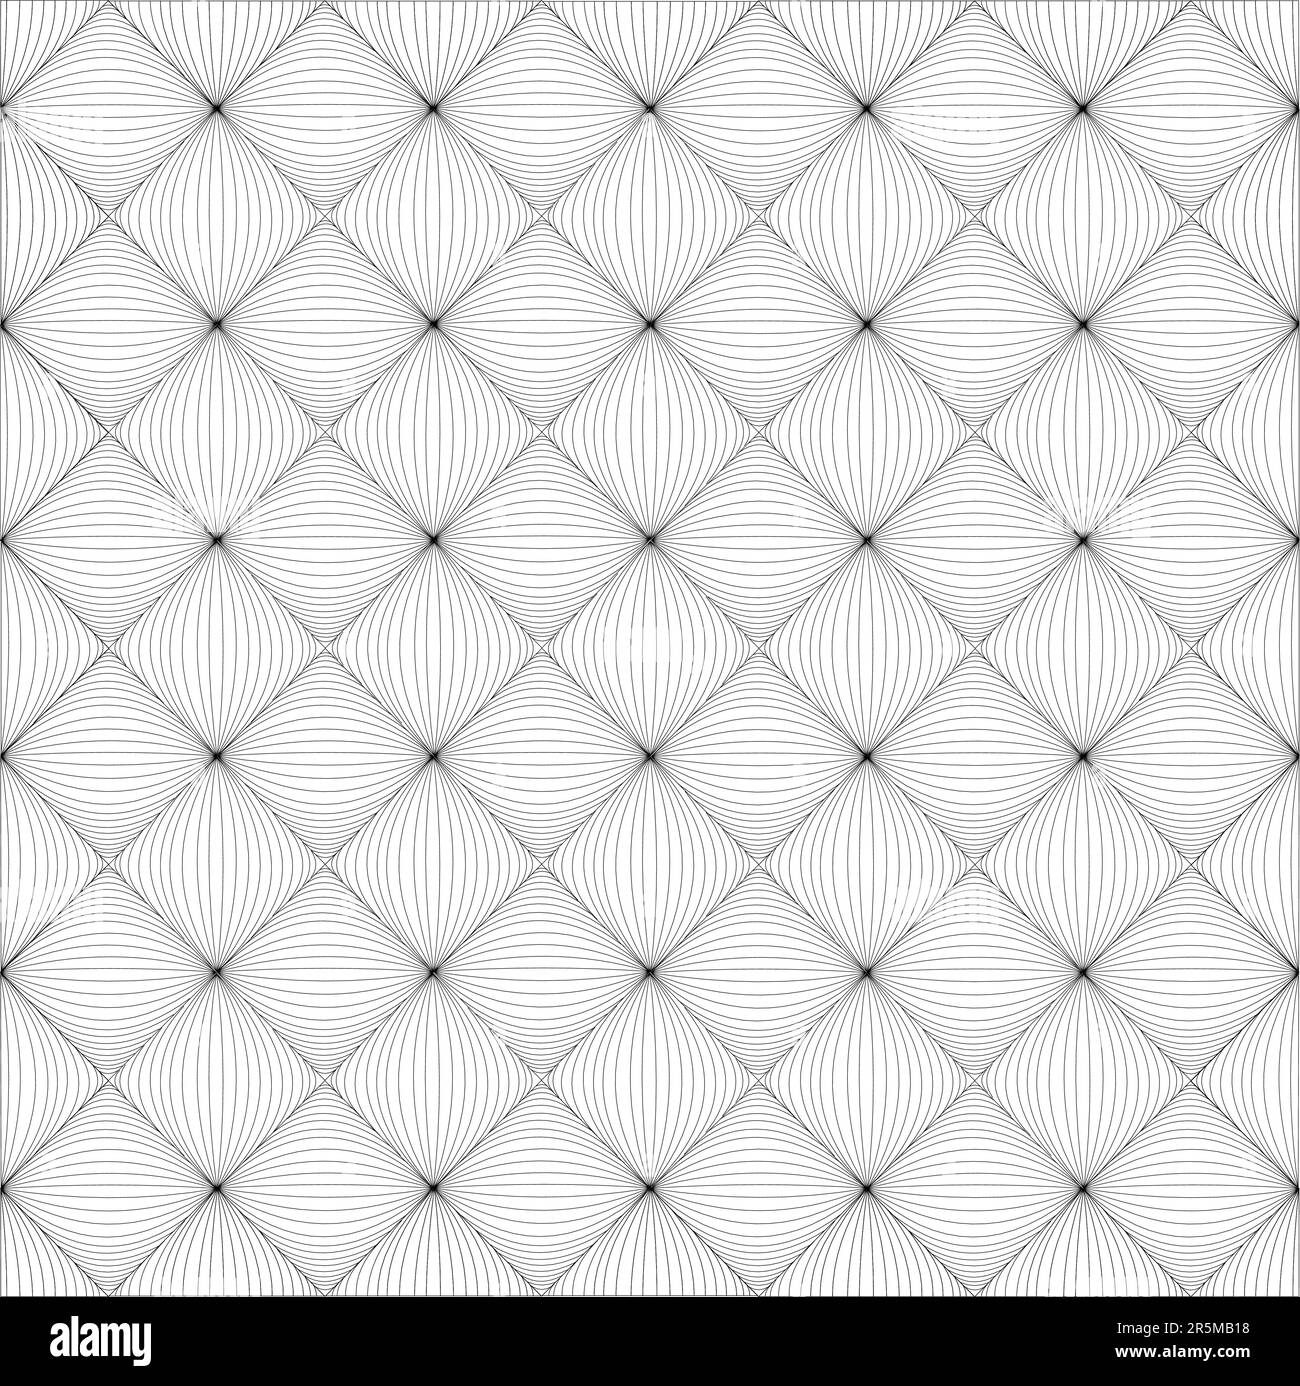 Geometry modern repeat pattern with textures. Vector illustration of triangle, square and onion motif.It can be used for tiles, textiles and wallpaper Stock Vector